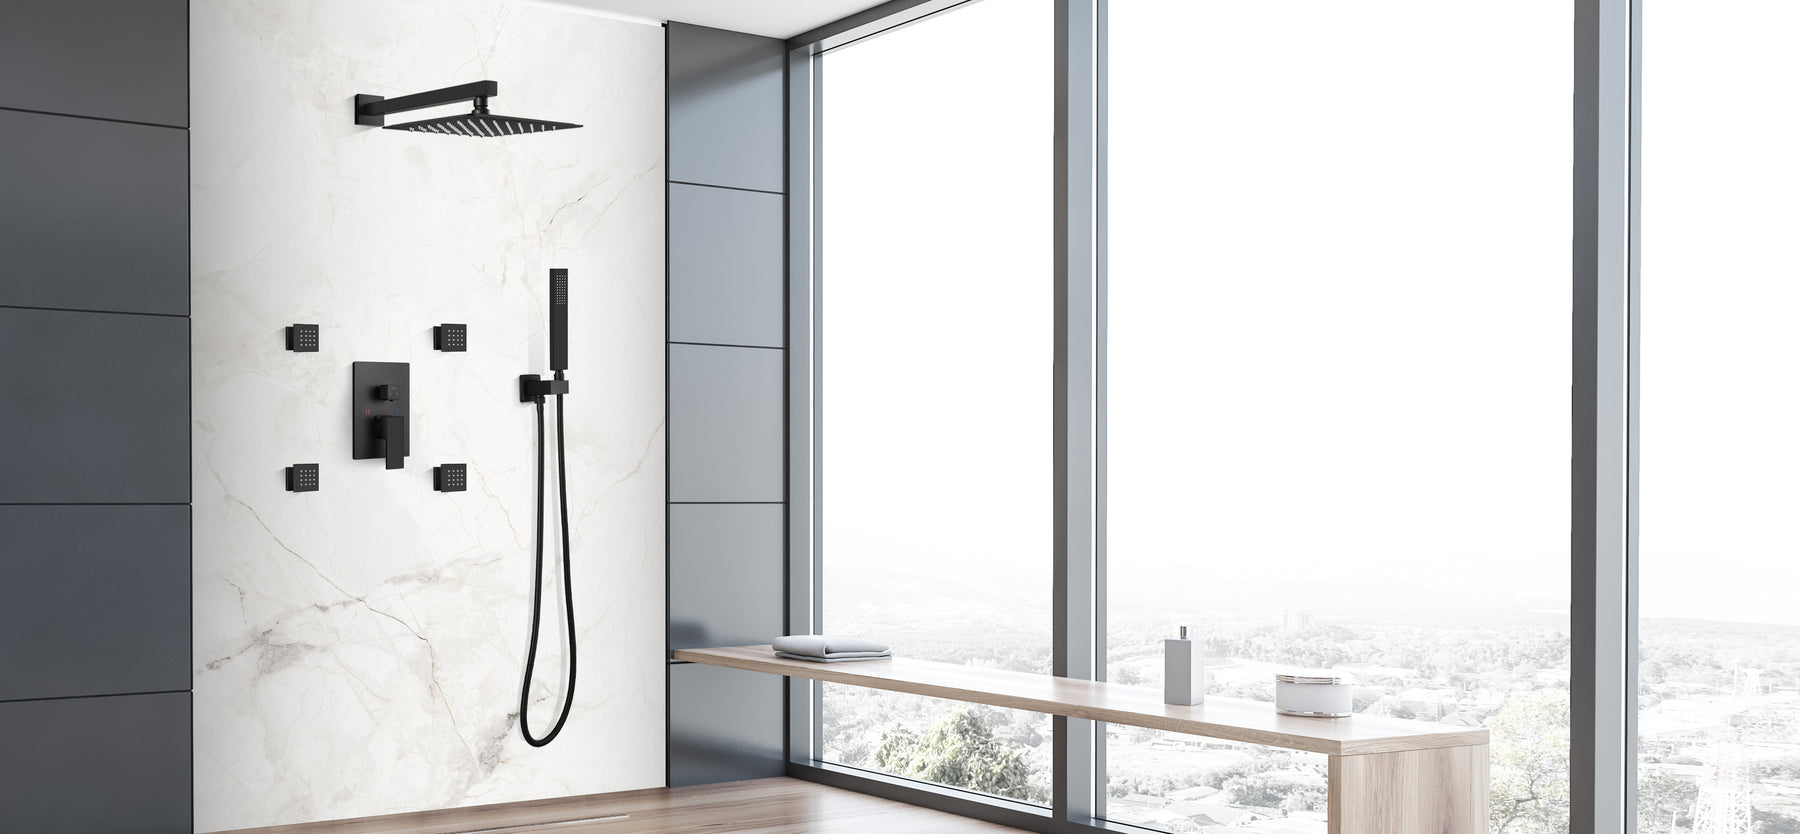 gotonovo Rain Mixer Shower Faucet Set 12 inch Square Rainfall Shower Head with  Body Spray Jets and Brass Handshower Matte Black Wall Mounted Pressure Balance Rough-in Valve and Trim Included